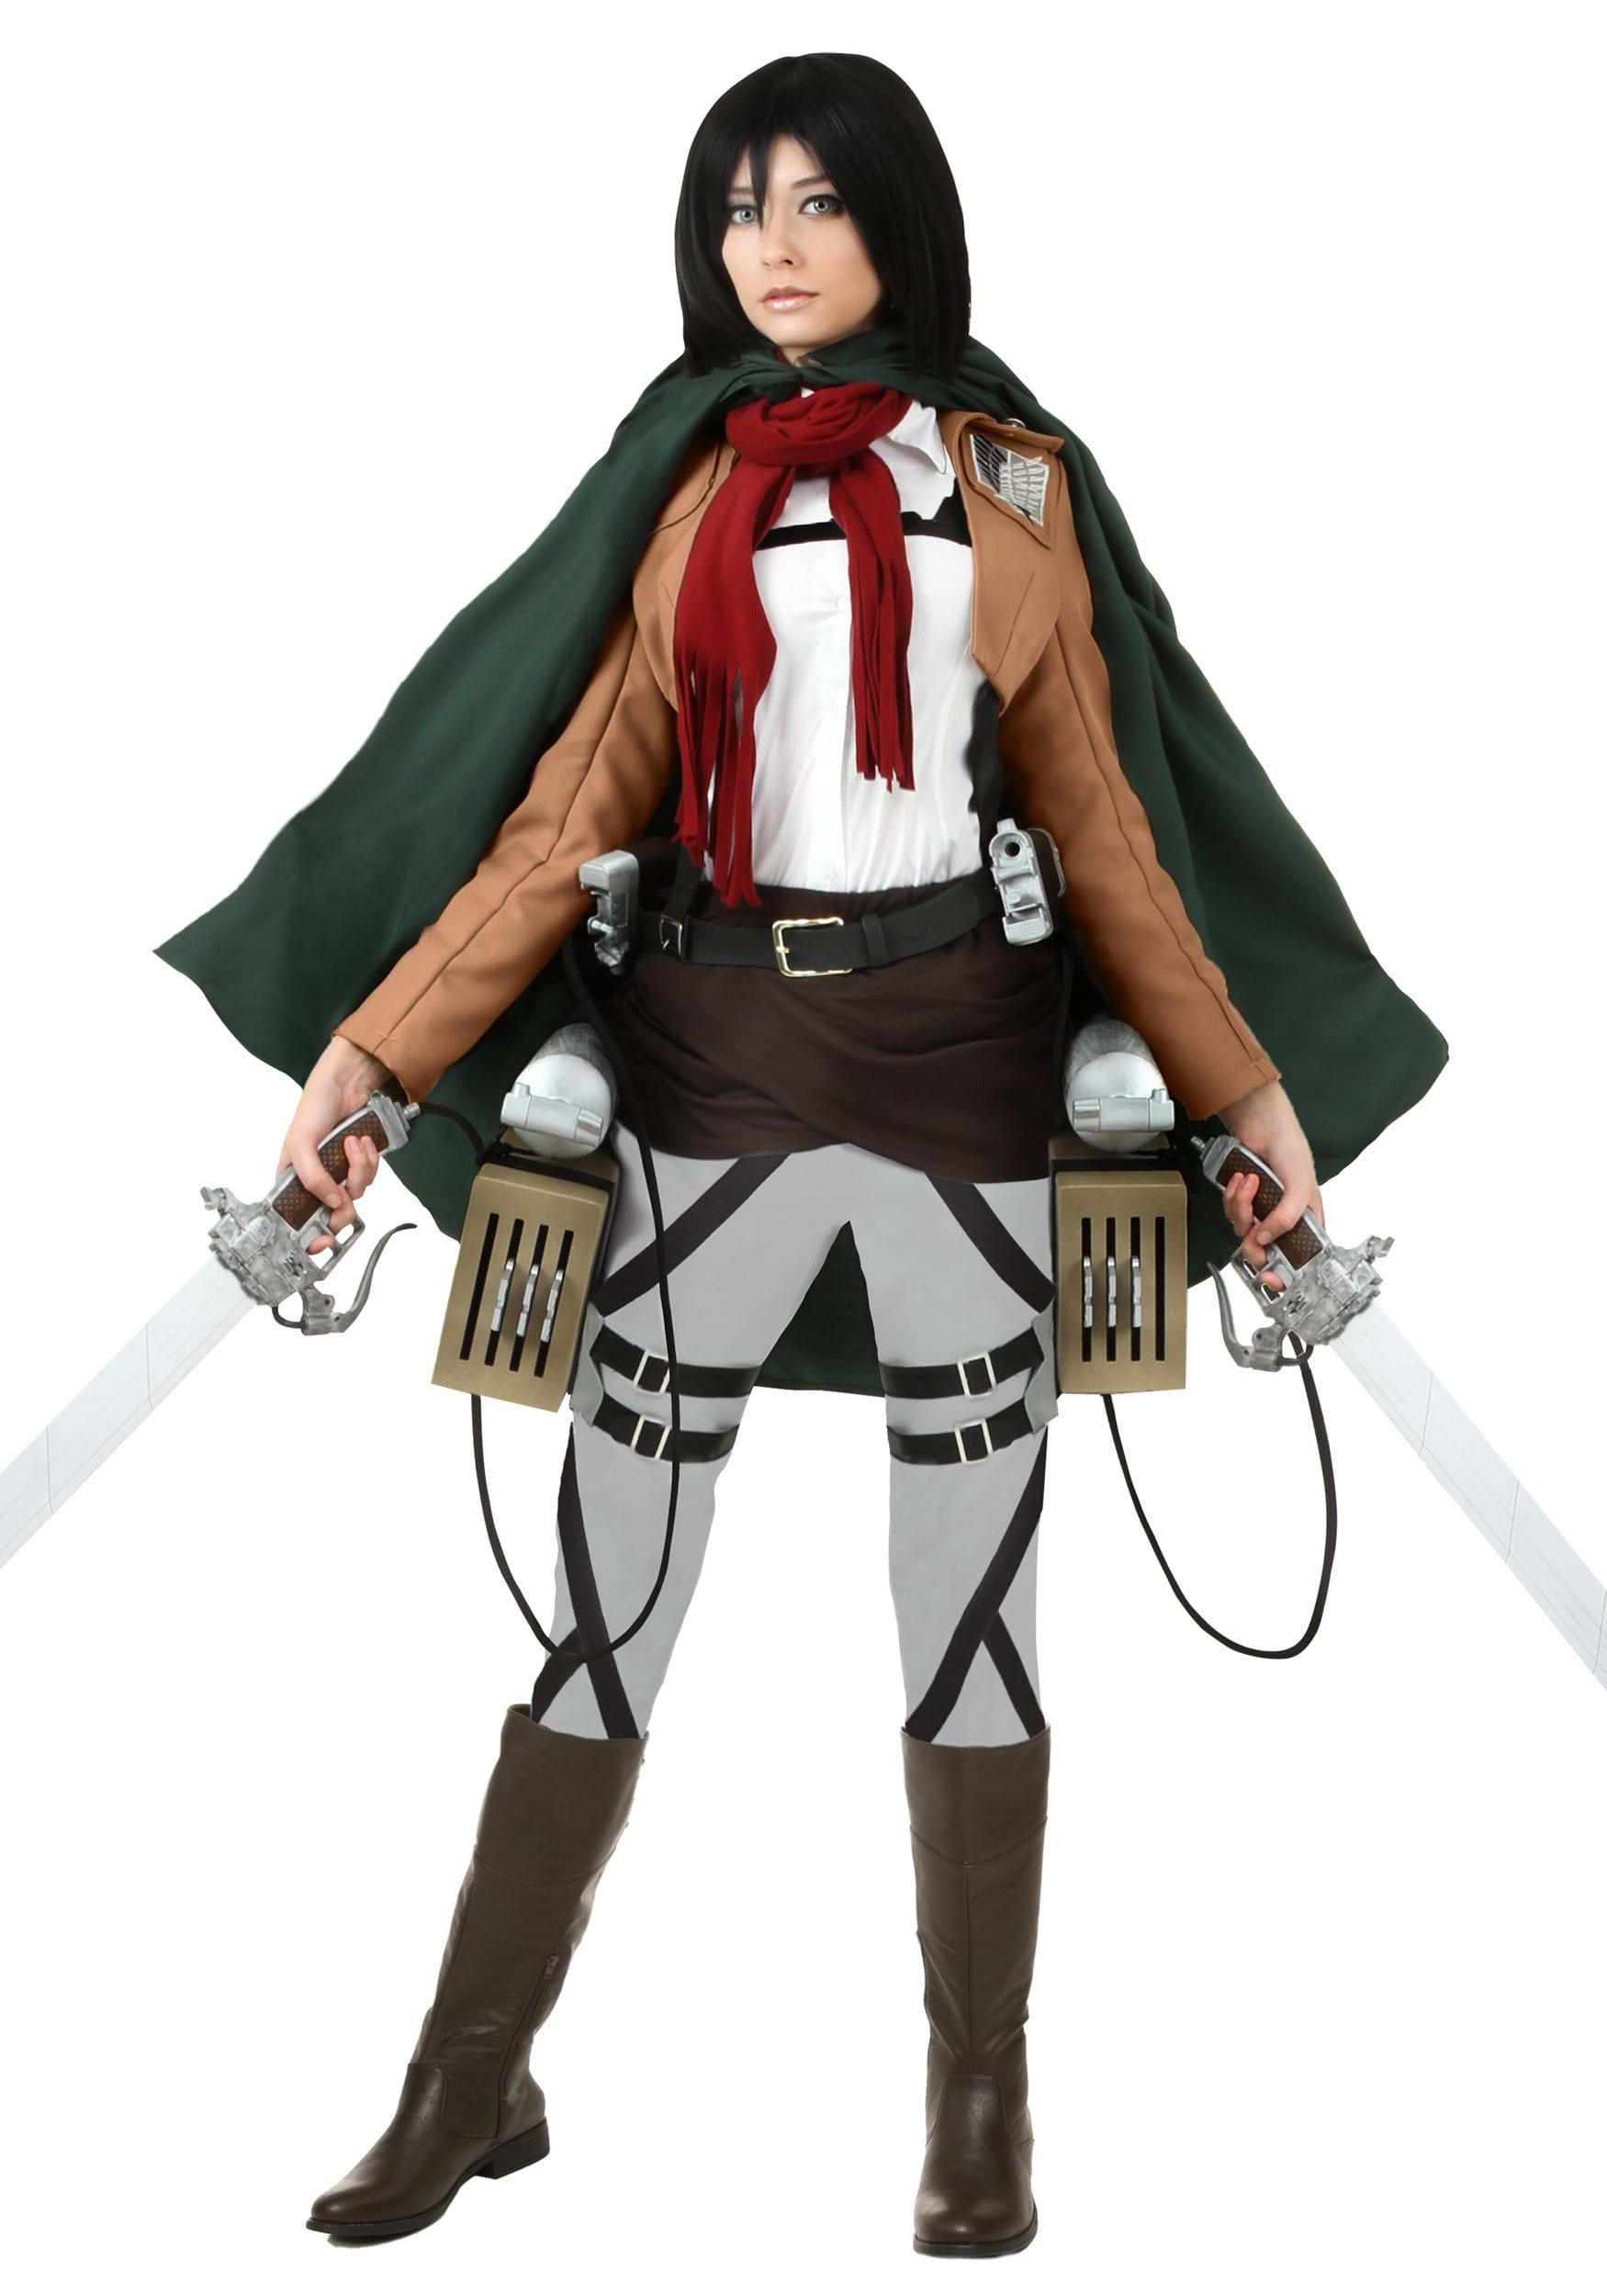 Photos - Fancy Dress Deluxe FUN Costumes Attack on TItan  Mikasa Costume | Attack on Titan Costu 